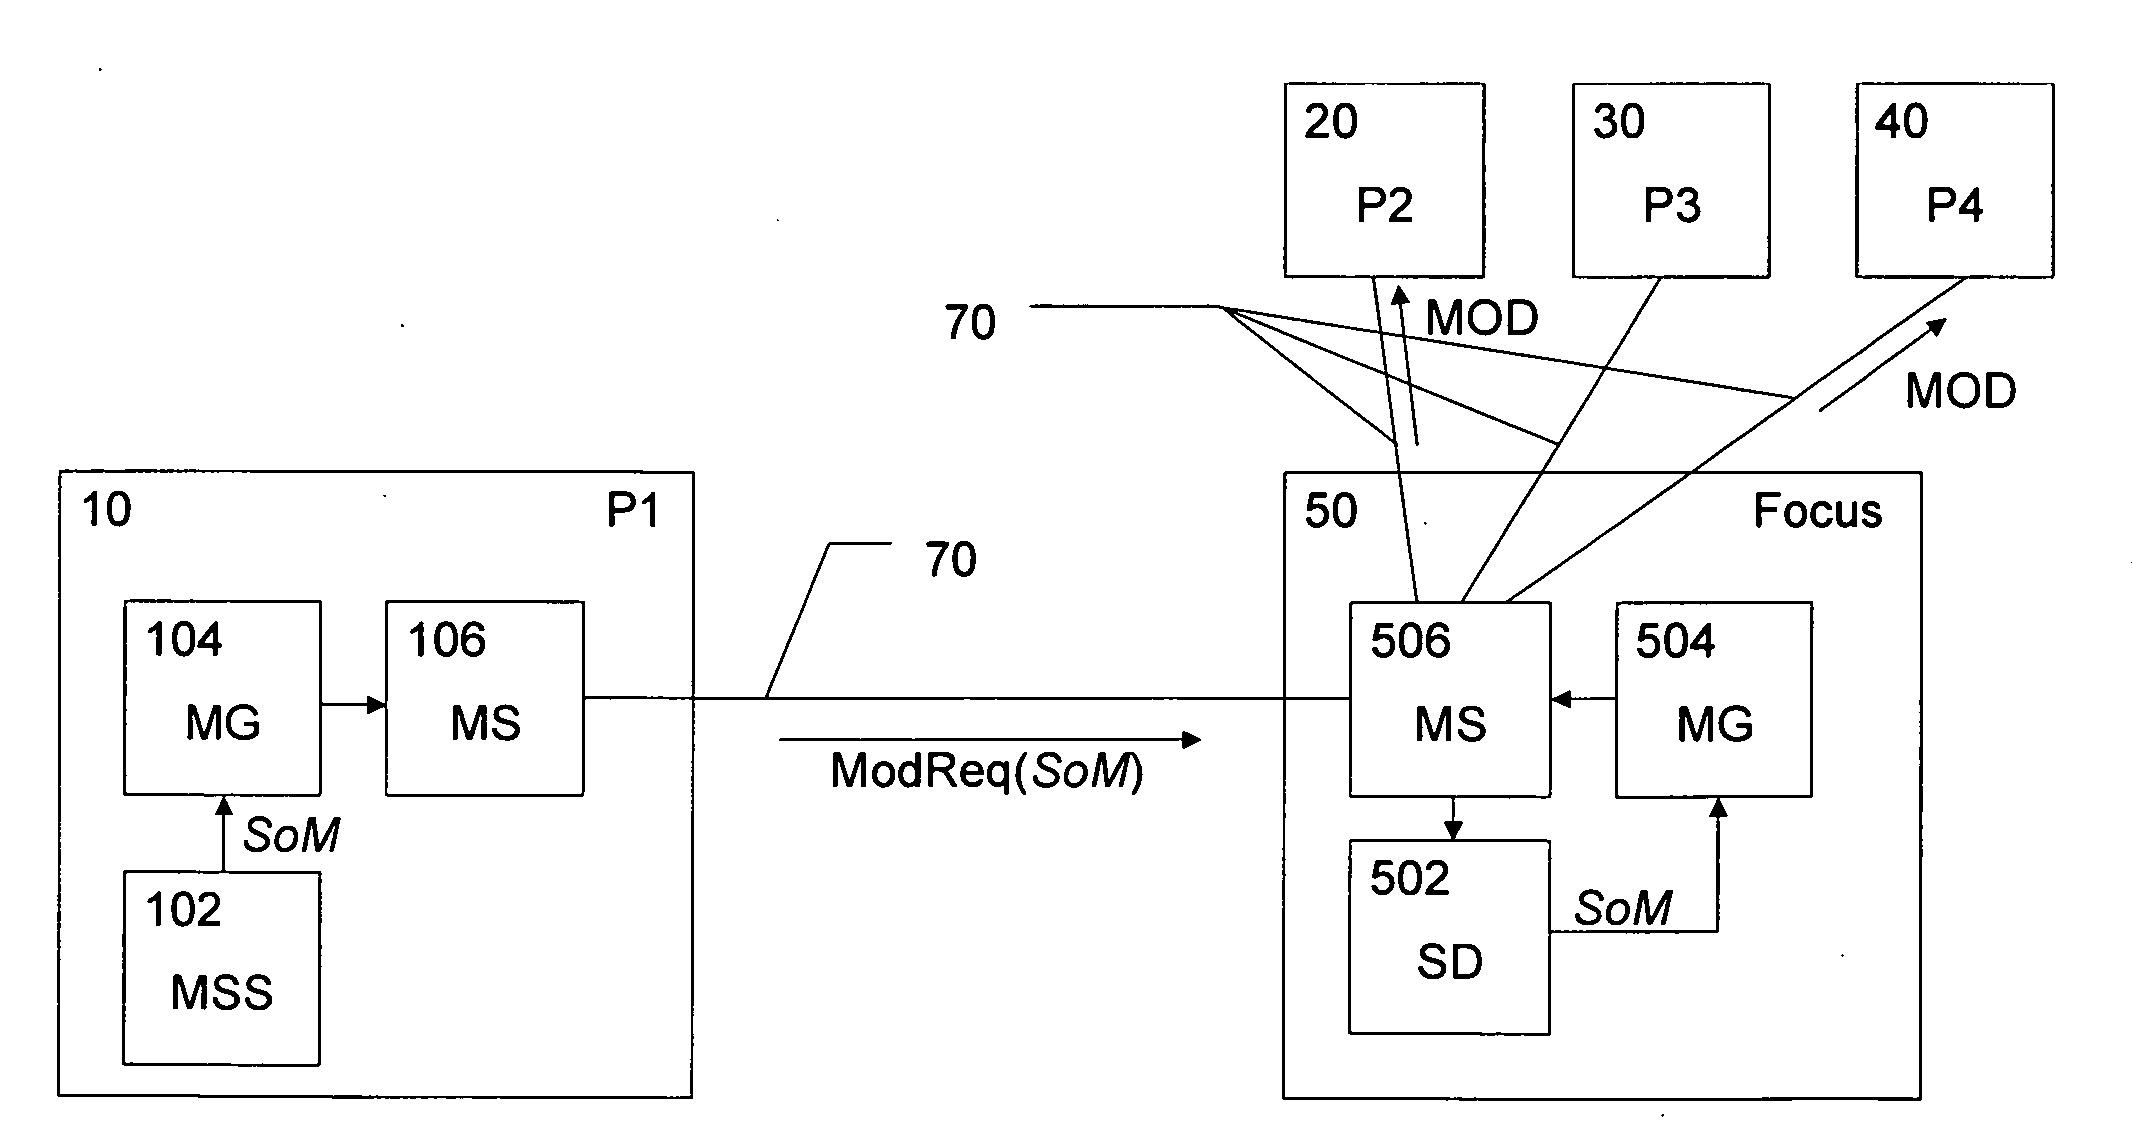 Third-party session modification